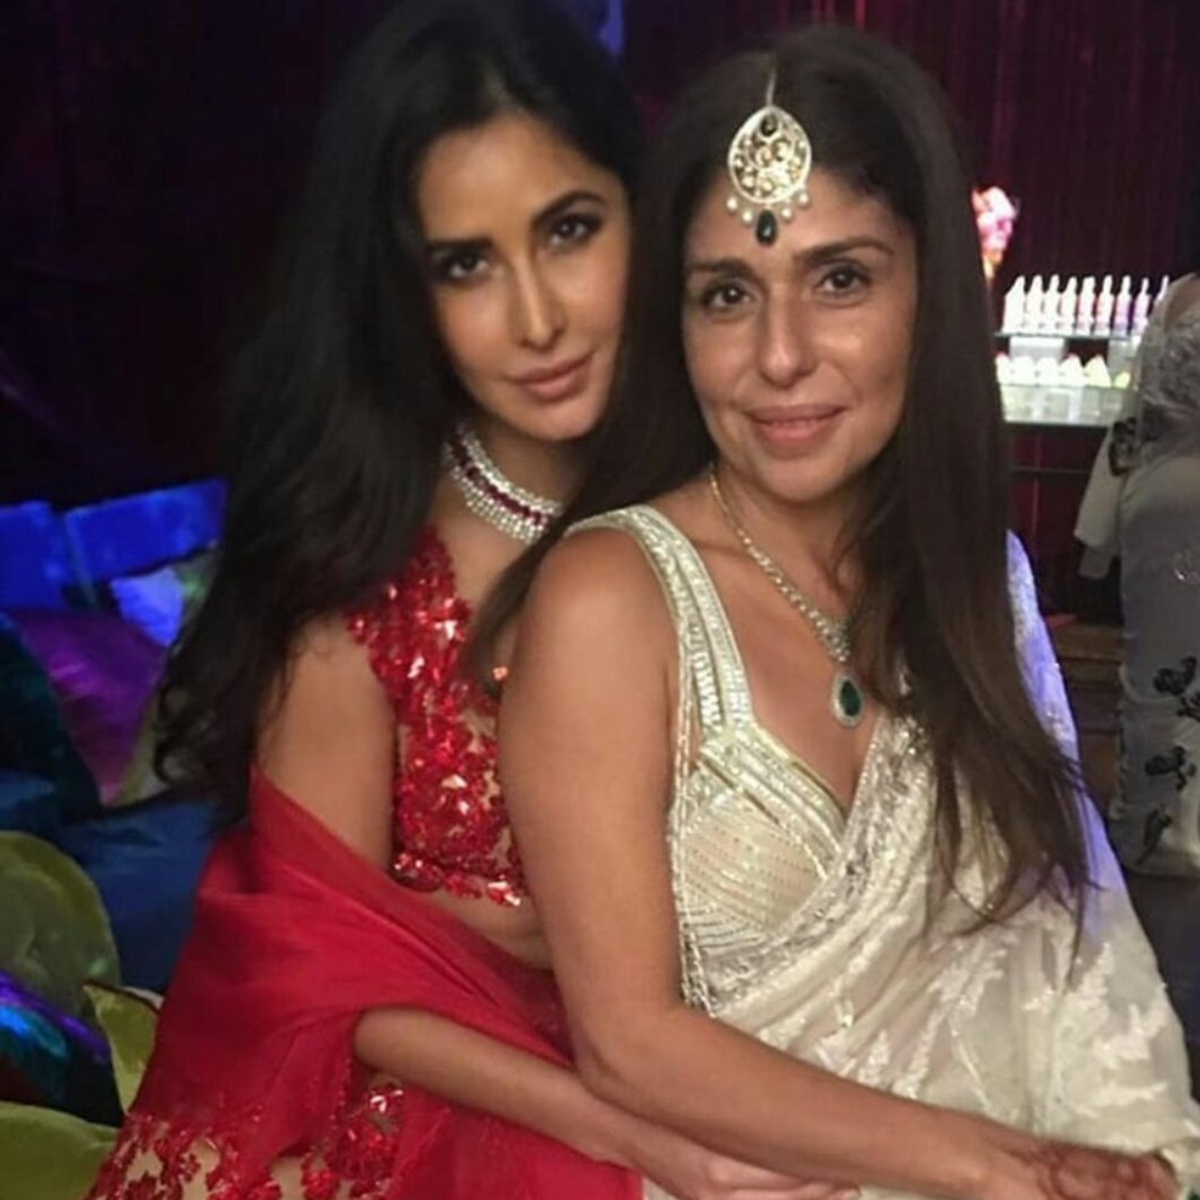 EXCLUSIVE: Anaita Shroff Adajania on styling Katrina's wedding: The planning was going on for months